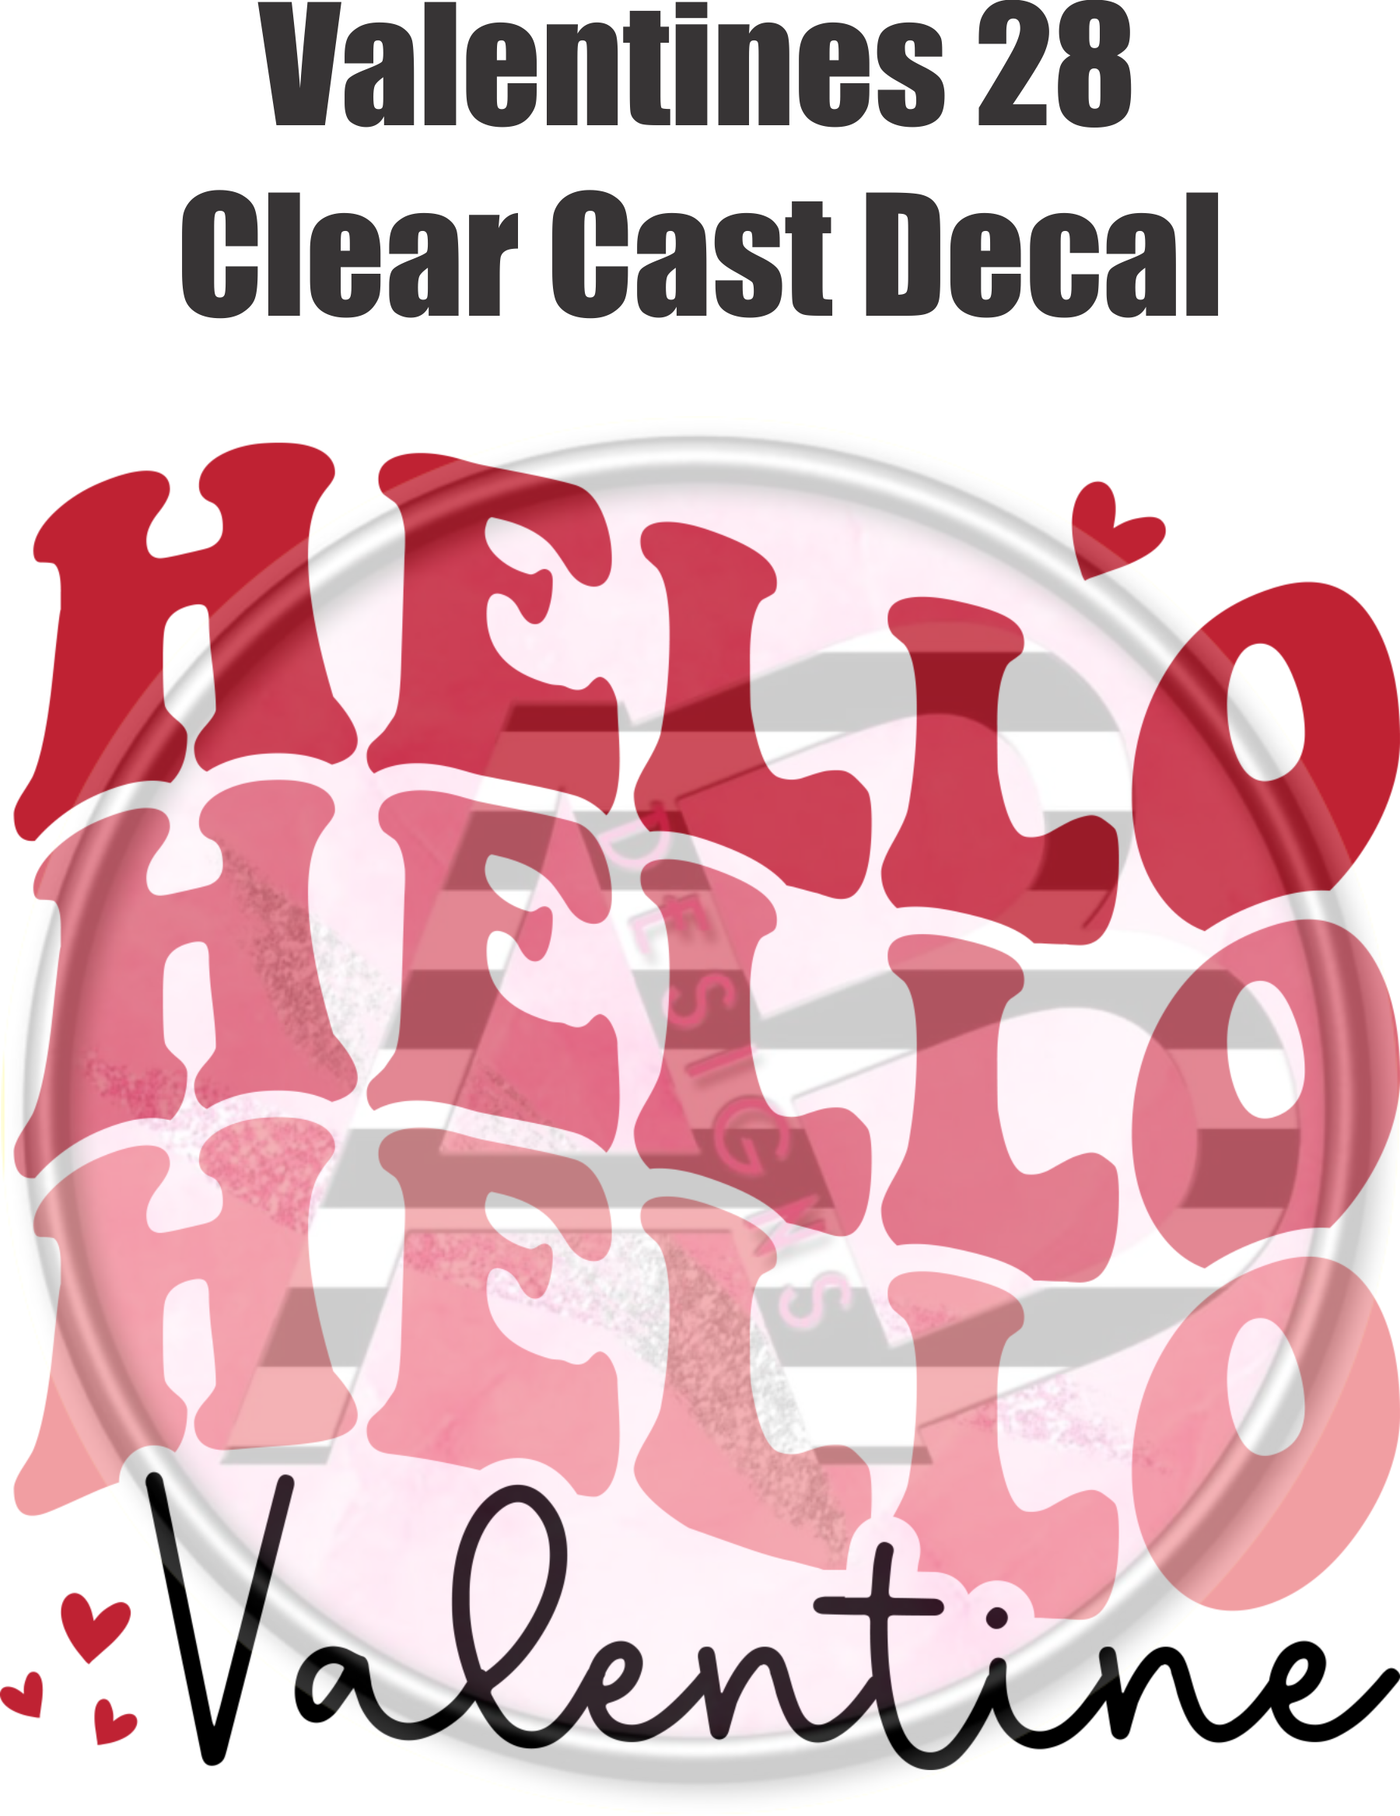 Valentines 28 - Clear Cast Decal